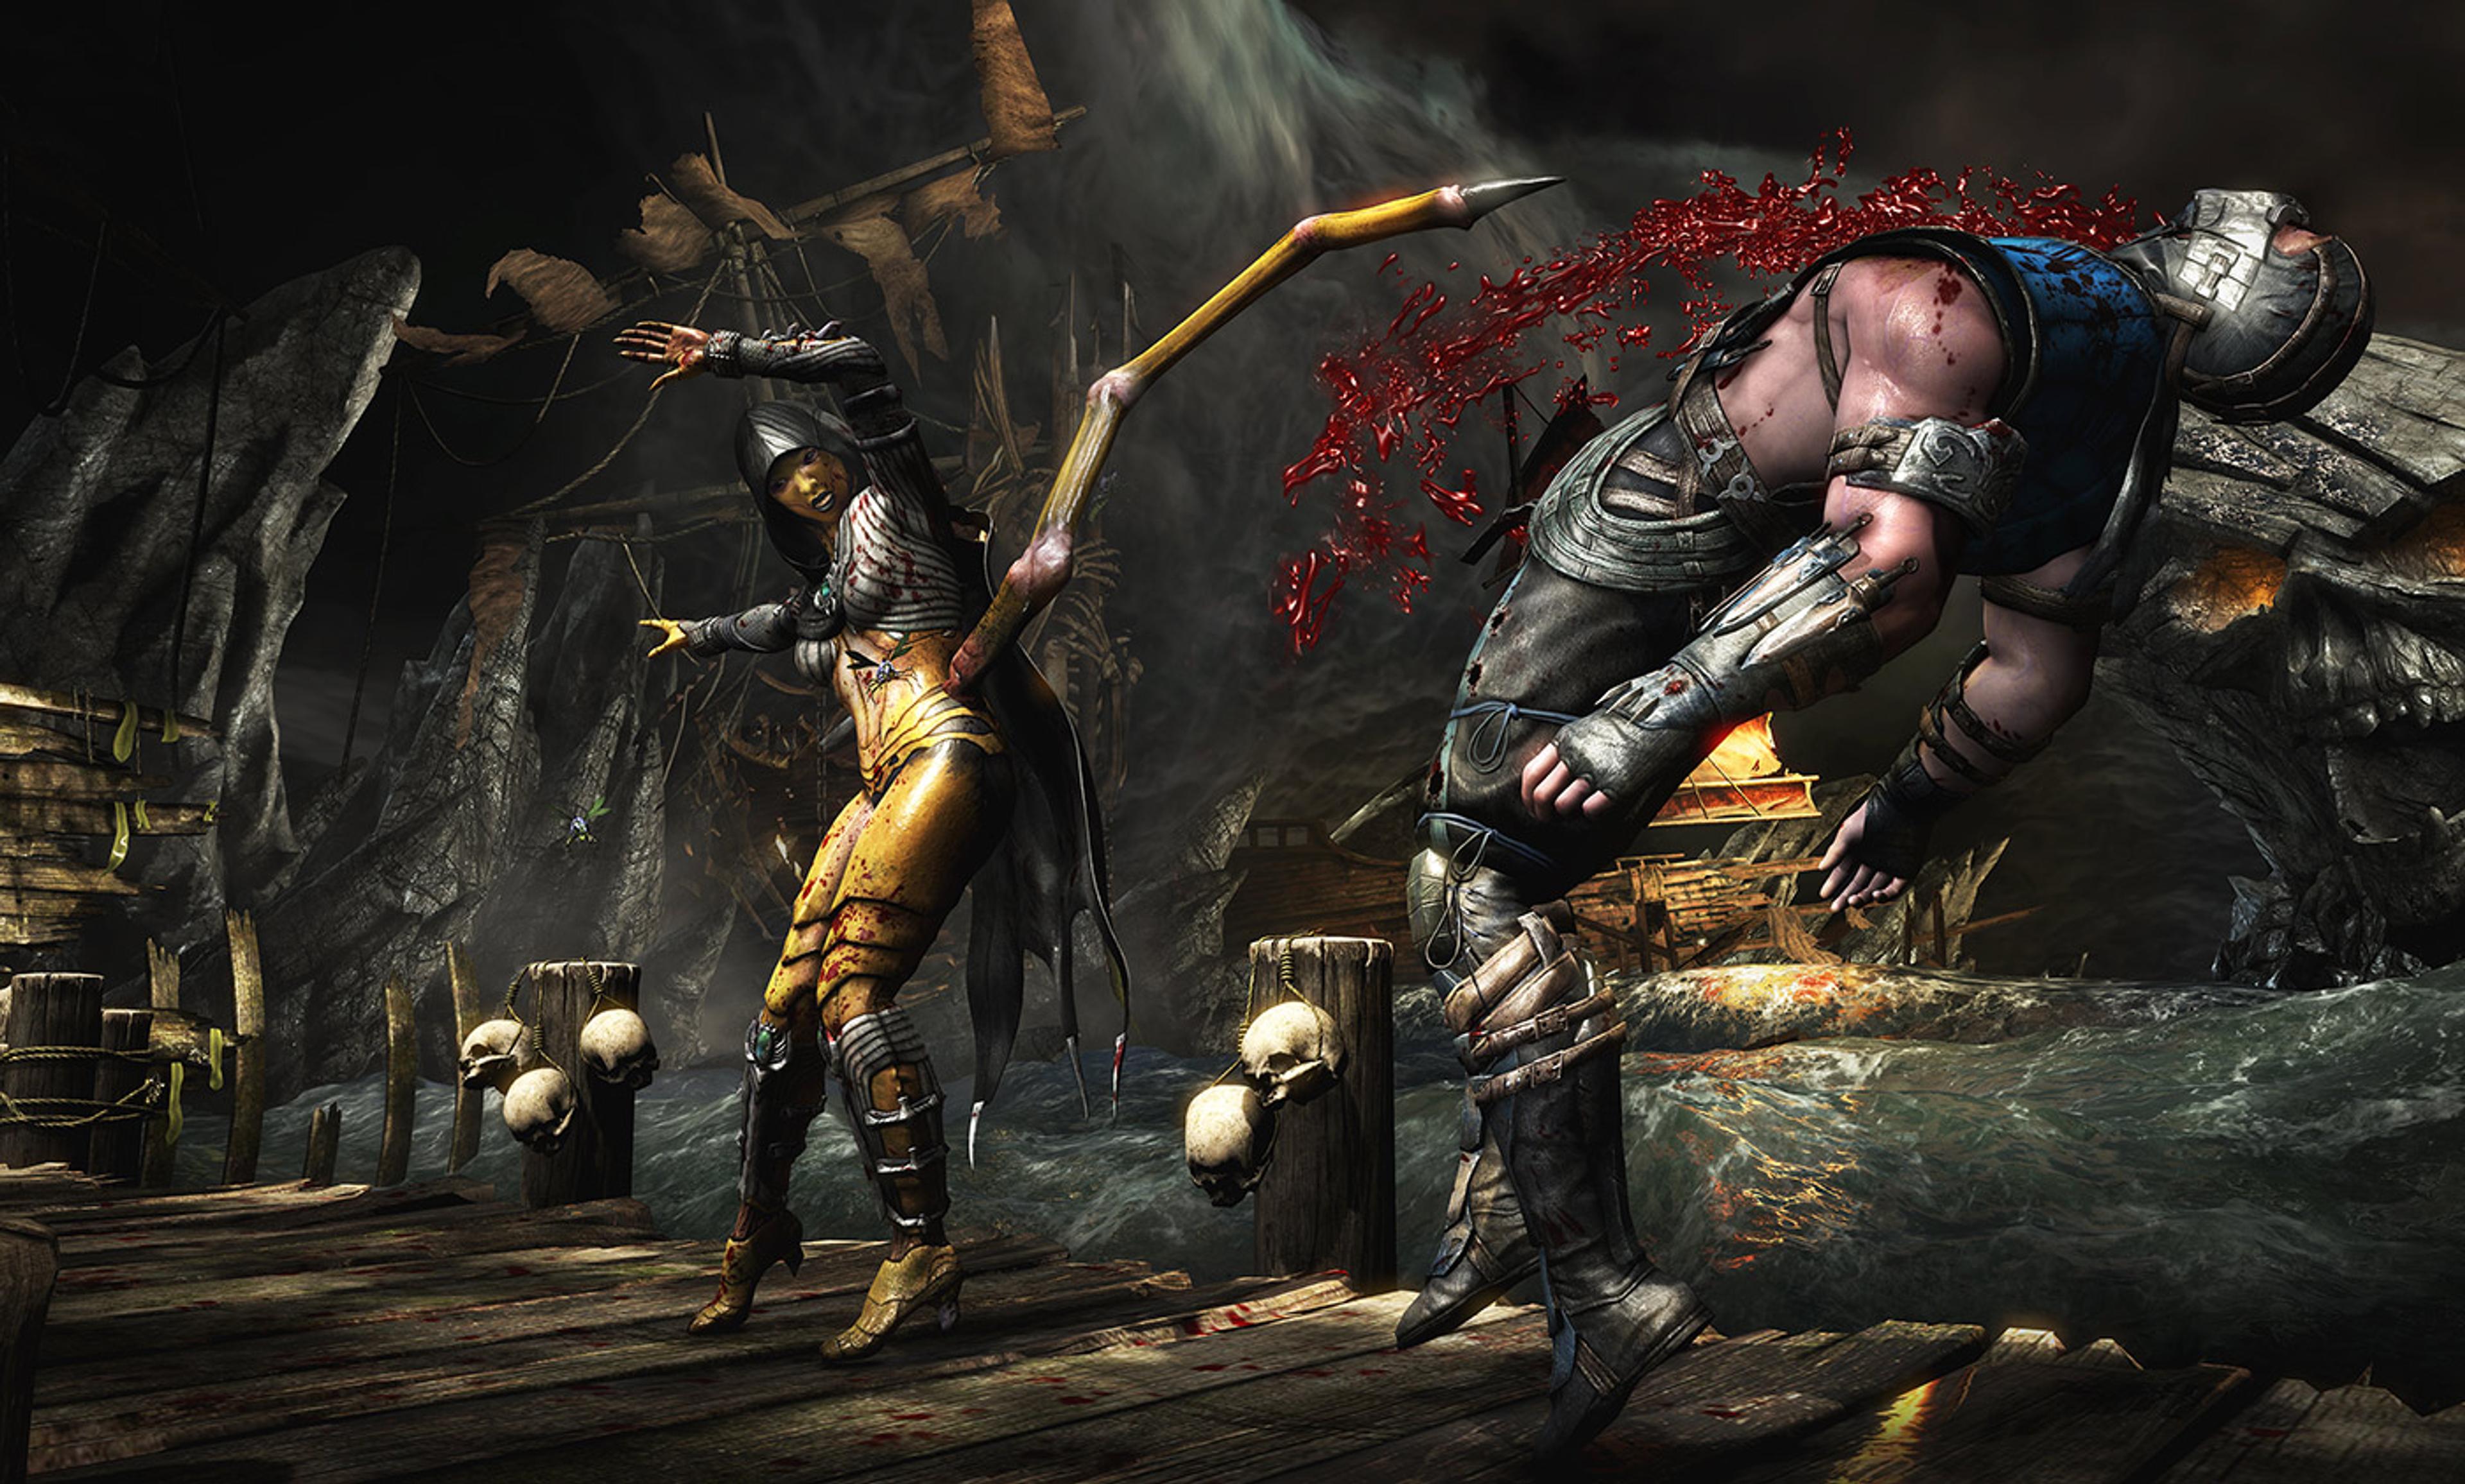 This Mortal Kombat X Fatality Is the Grossest Thing You'll See on